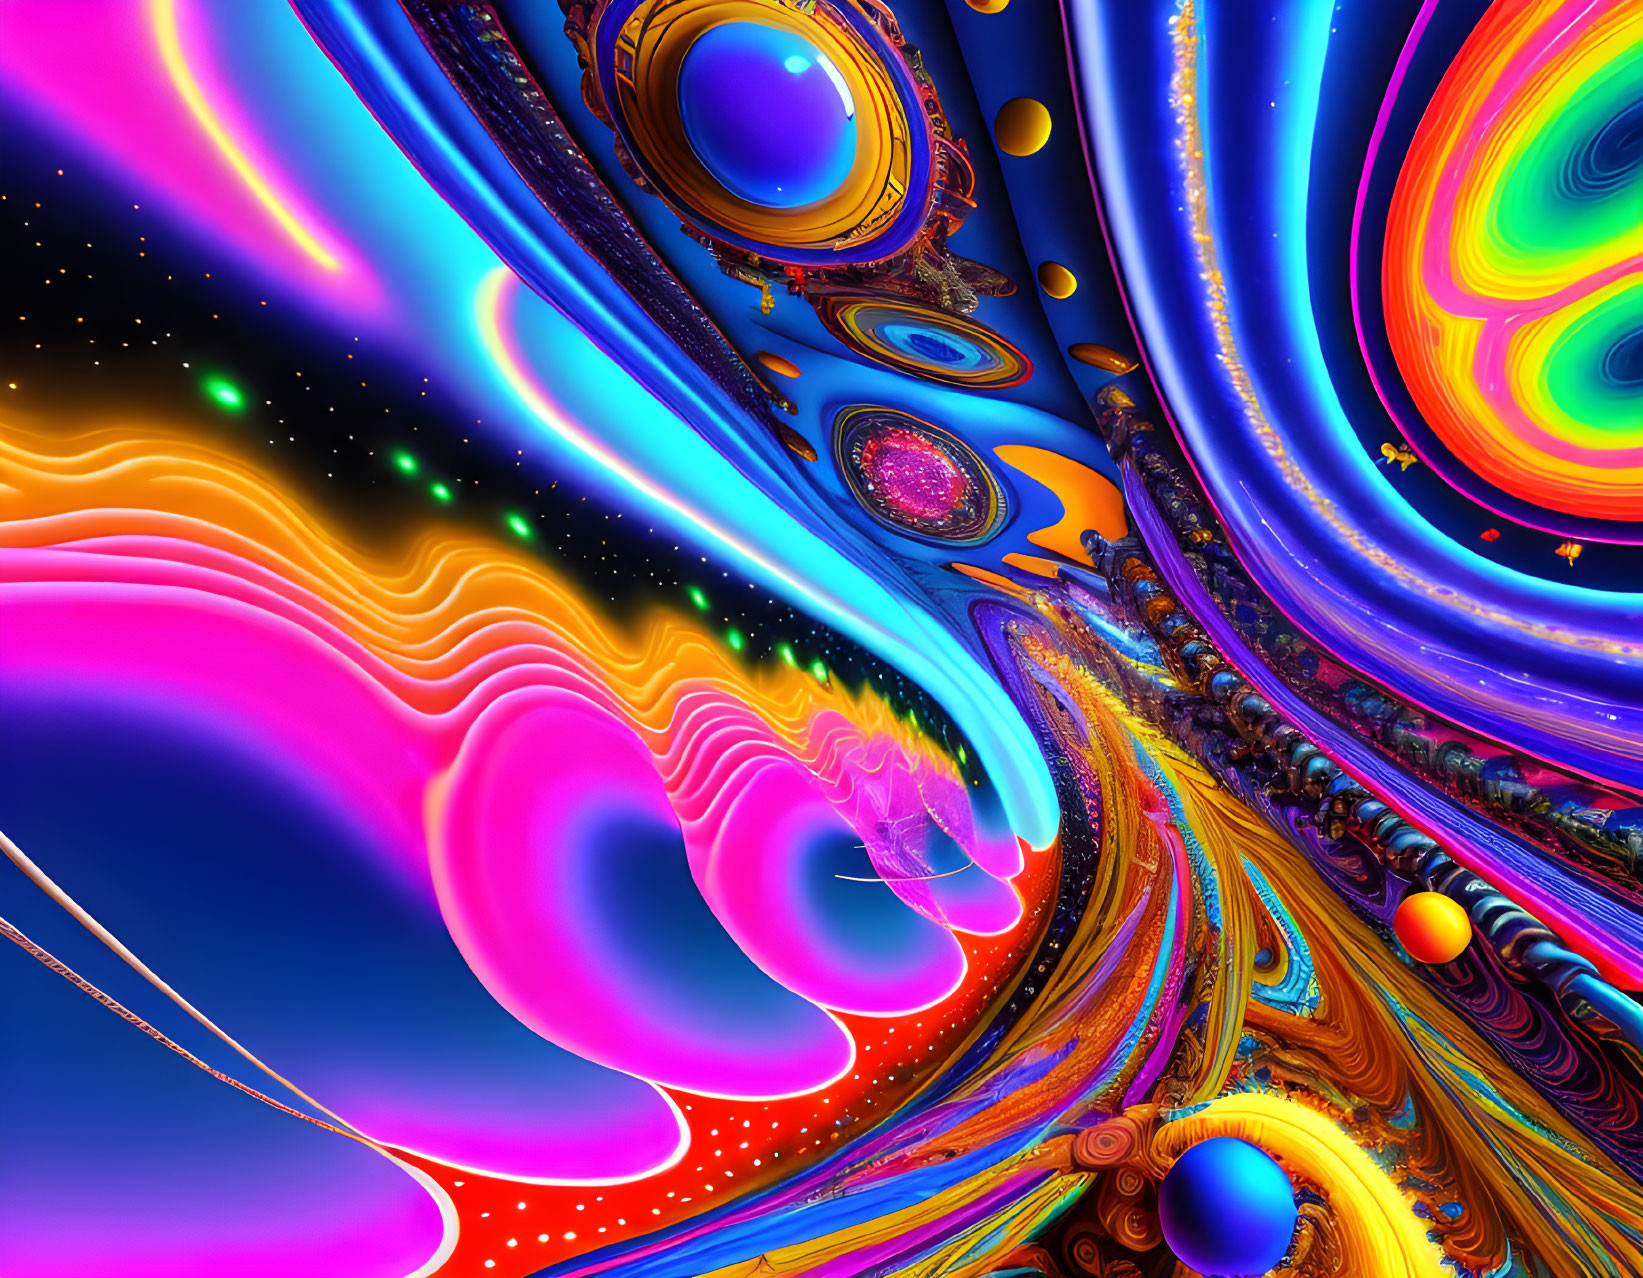 Colorful Swirling Fractal Image with Psychedelic Patterns